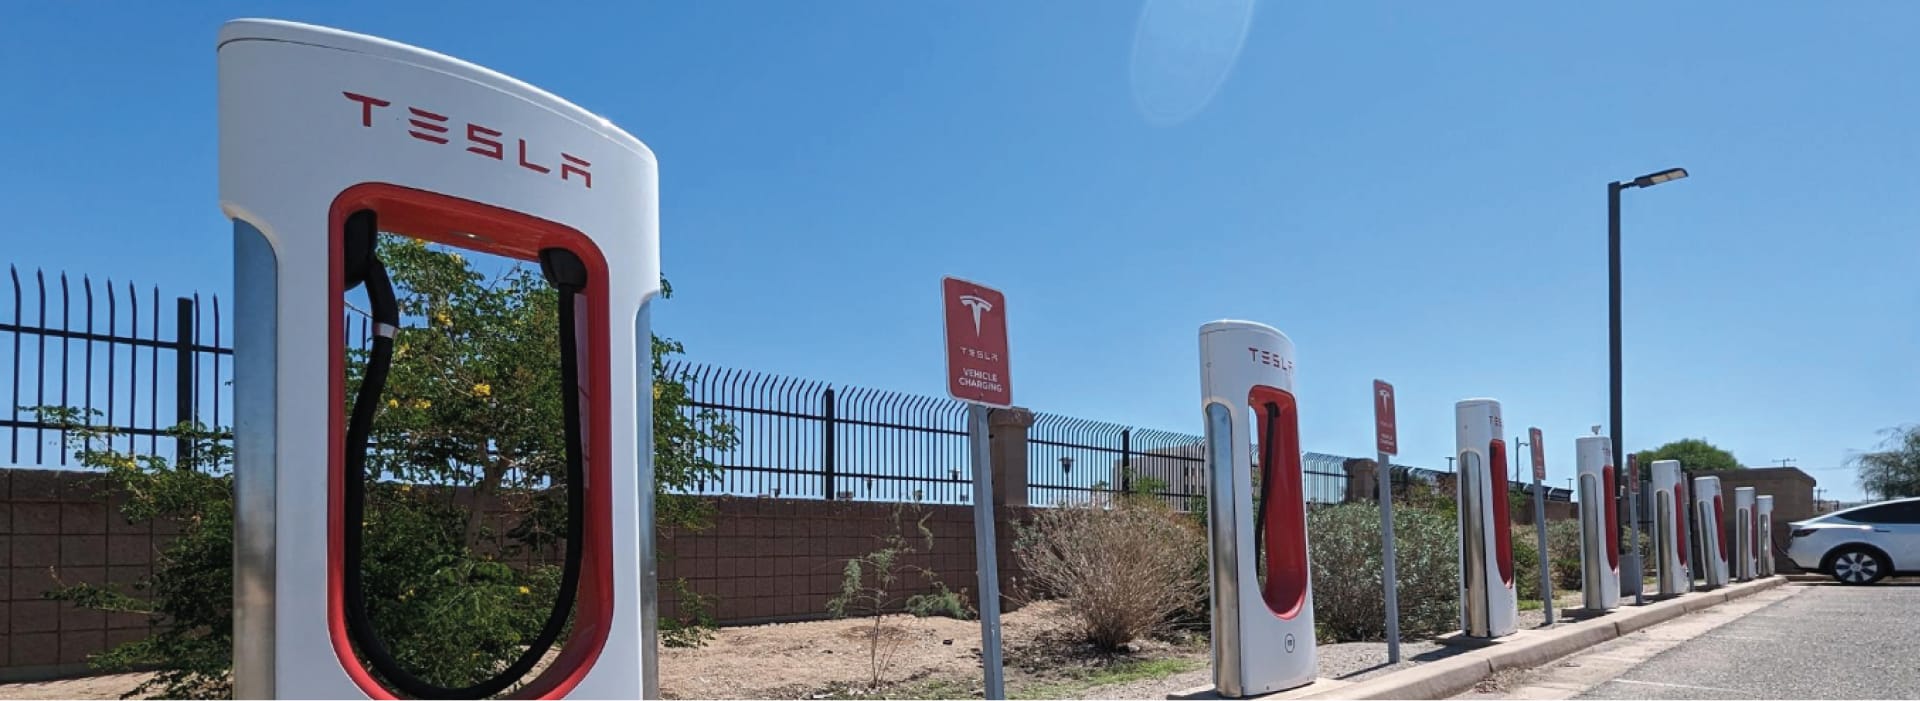 Tesla Charging Stations in downtown yuma